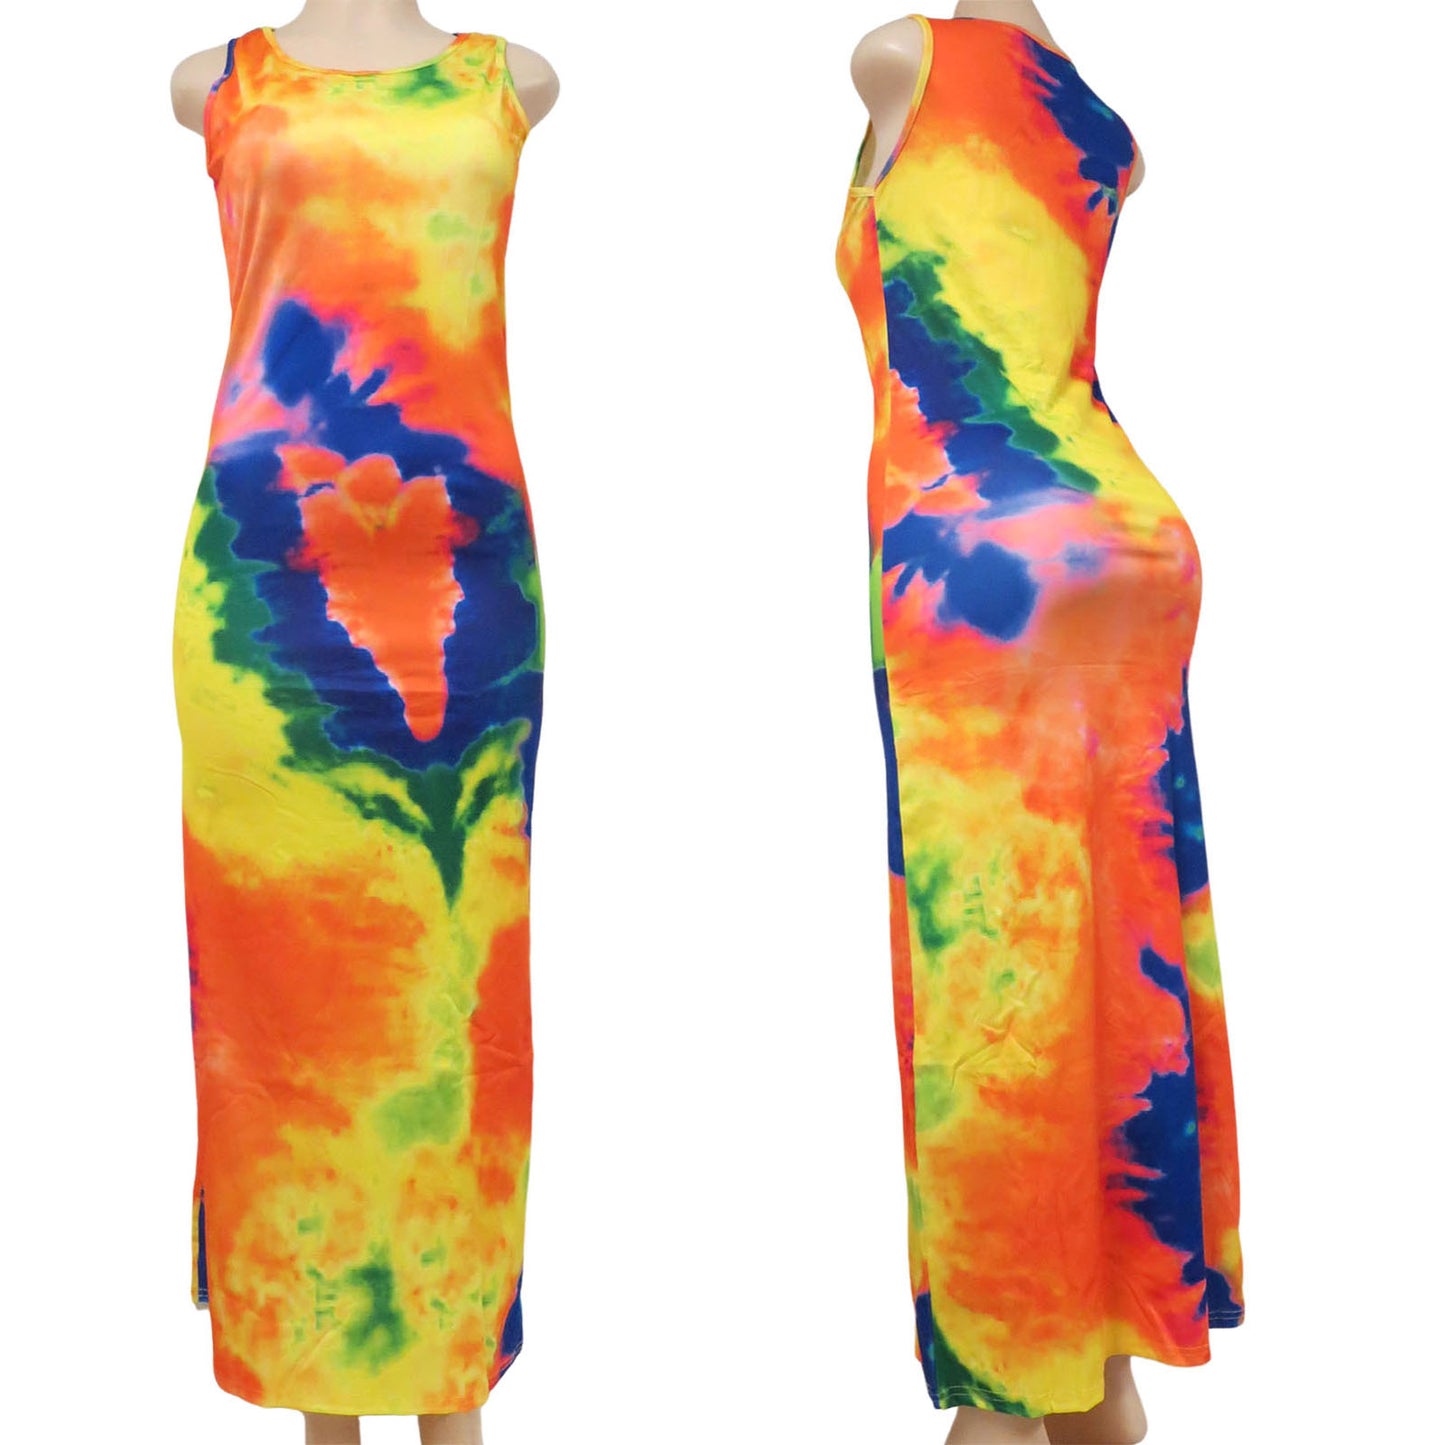 wholesale tie dye long sleeveless dress for women in multicolor yellow orange blue and green